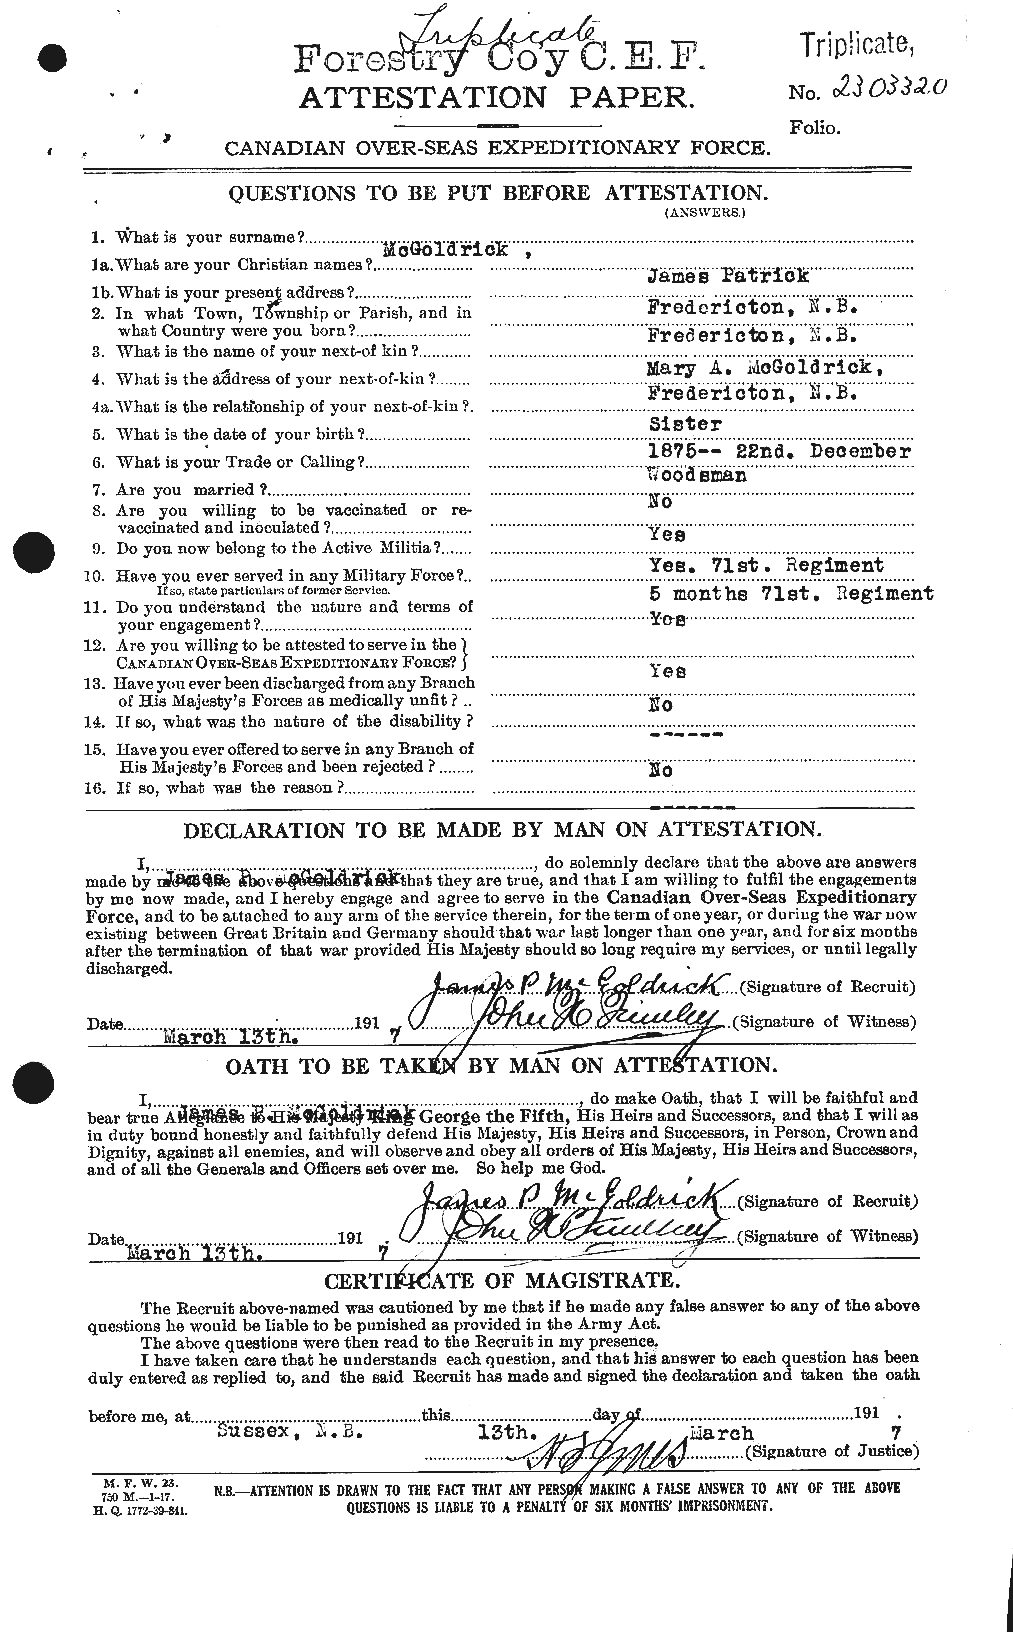 Personnel Records of the First World War - CEF 528473a